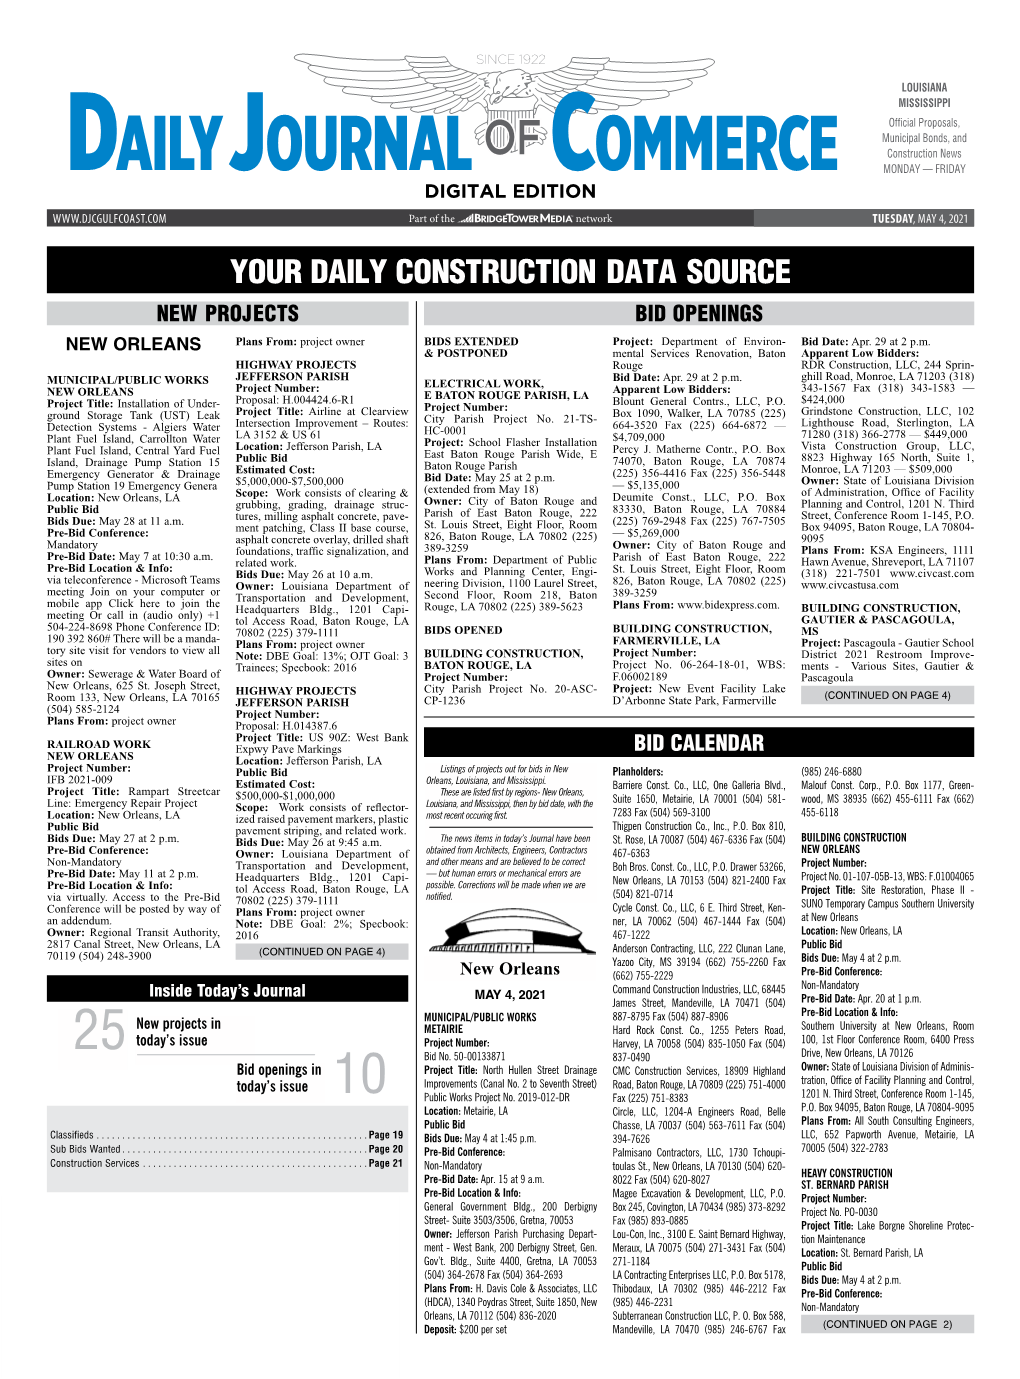 YOUR DAILY CONSTRUCTION DATA SOURCE NEW PROJECTS BID OPENINGS NEW ORLEANS Plans From: Project Owner BIDS EXTENDED Project: Department of Environ- Bid Date: Apr